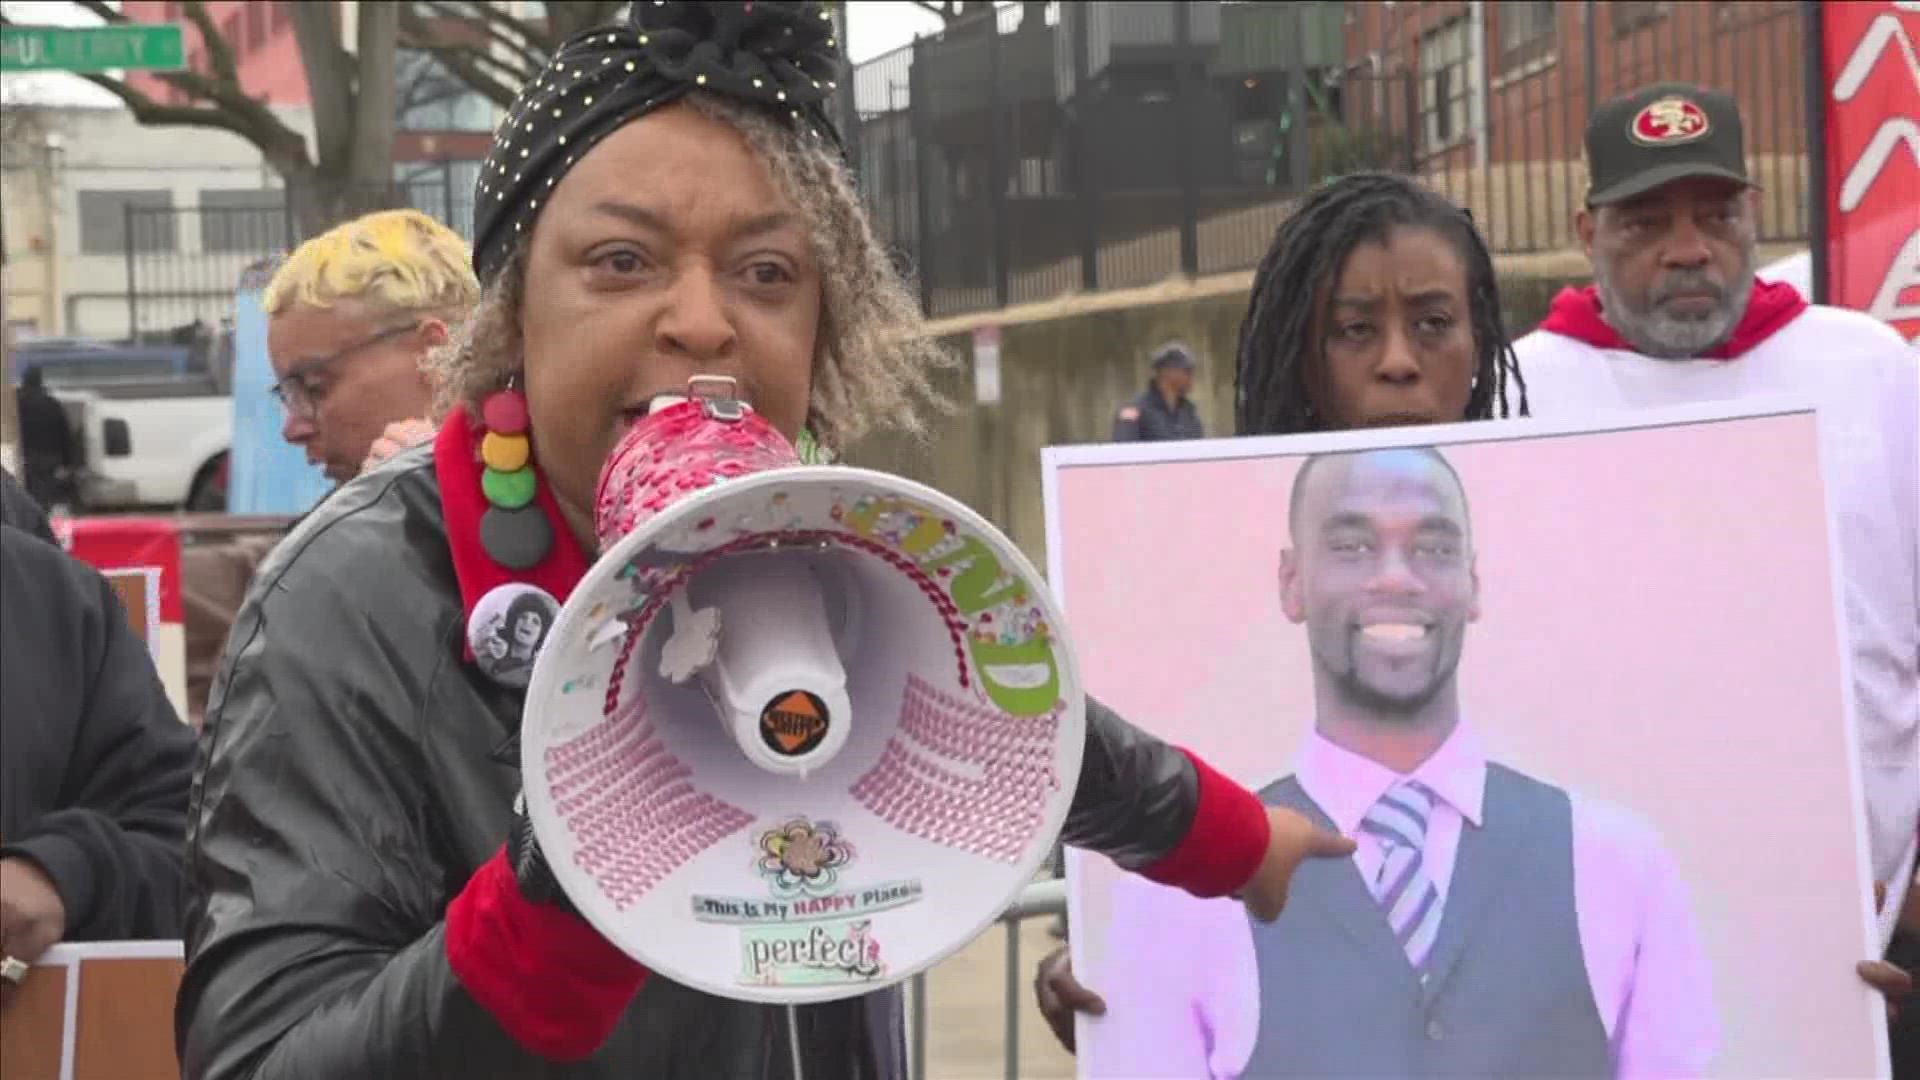 Tire Nichols' family hired civil rights attorney Ben Crump, who wanted the body camera and surveillance video released.